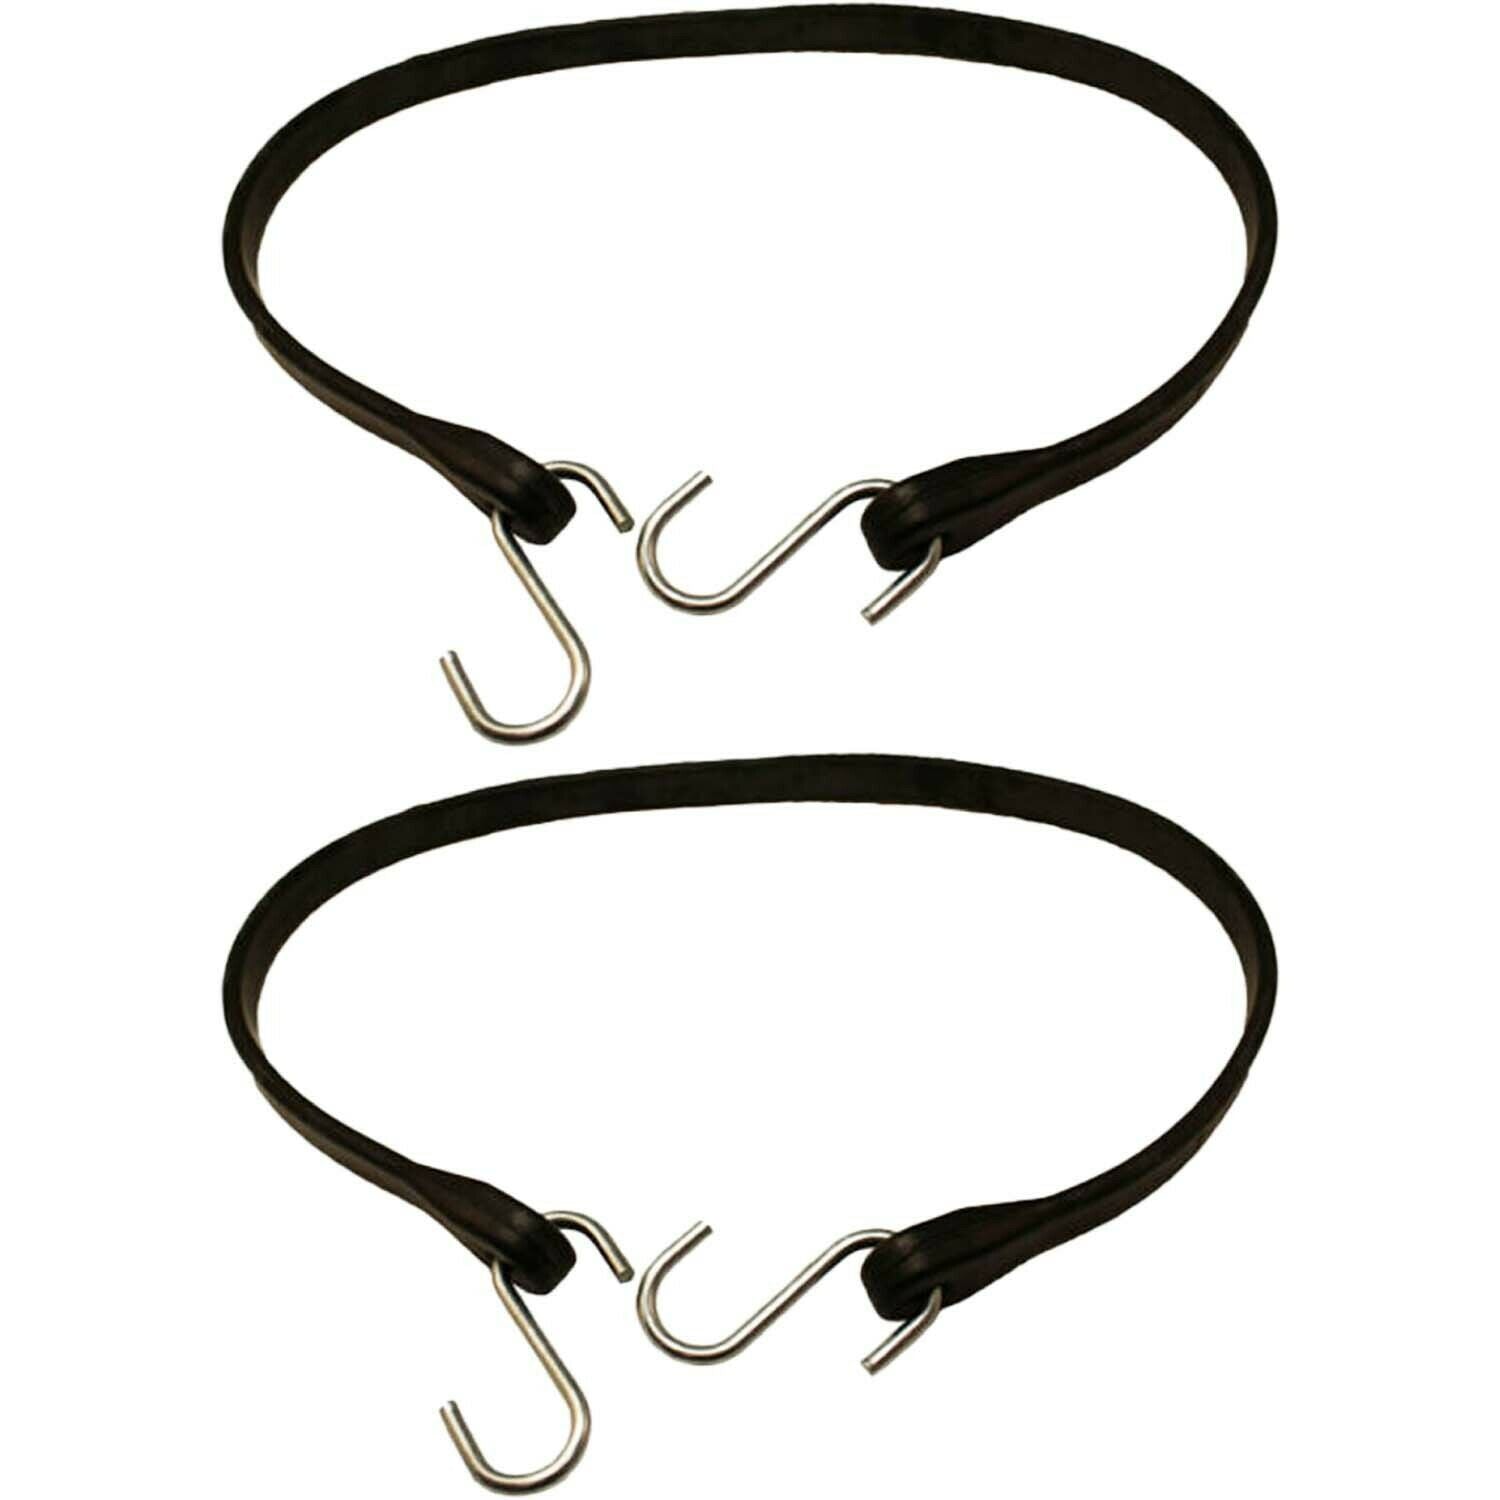 Peerless CC8441 41" EPDM Rubber Bungee Tarp Strap with Hooks Pack of 2